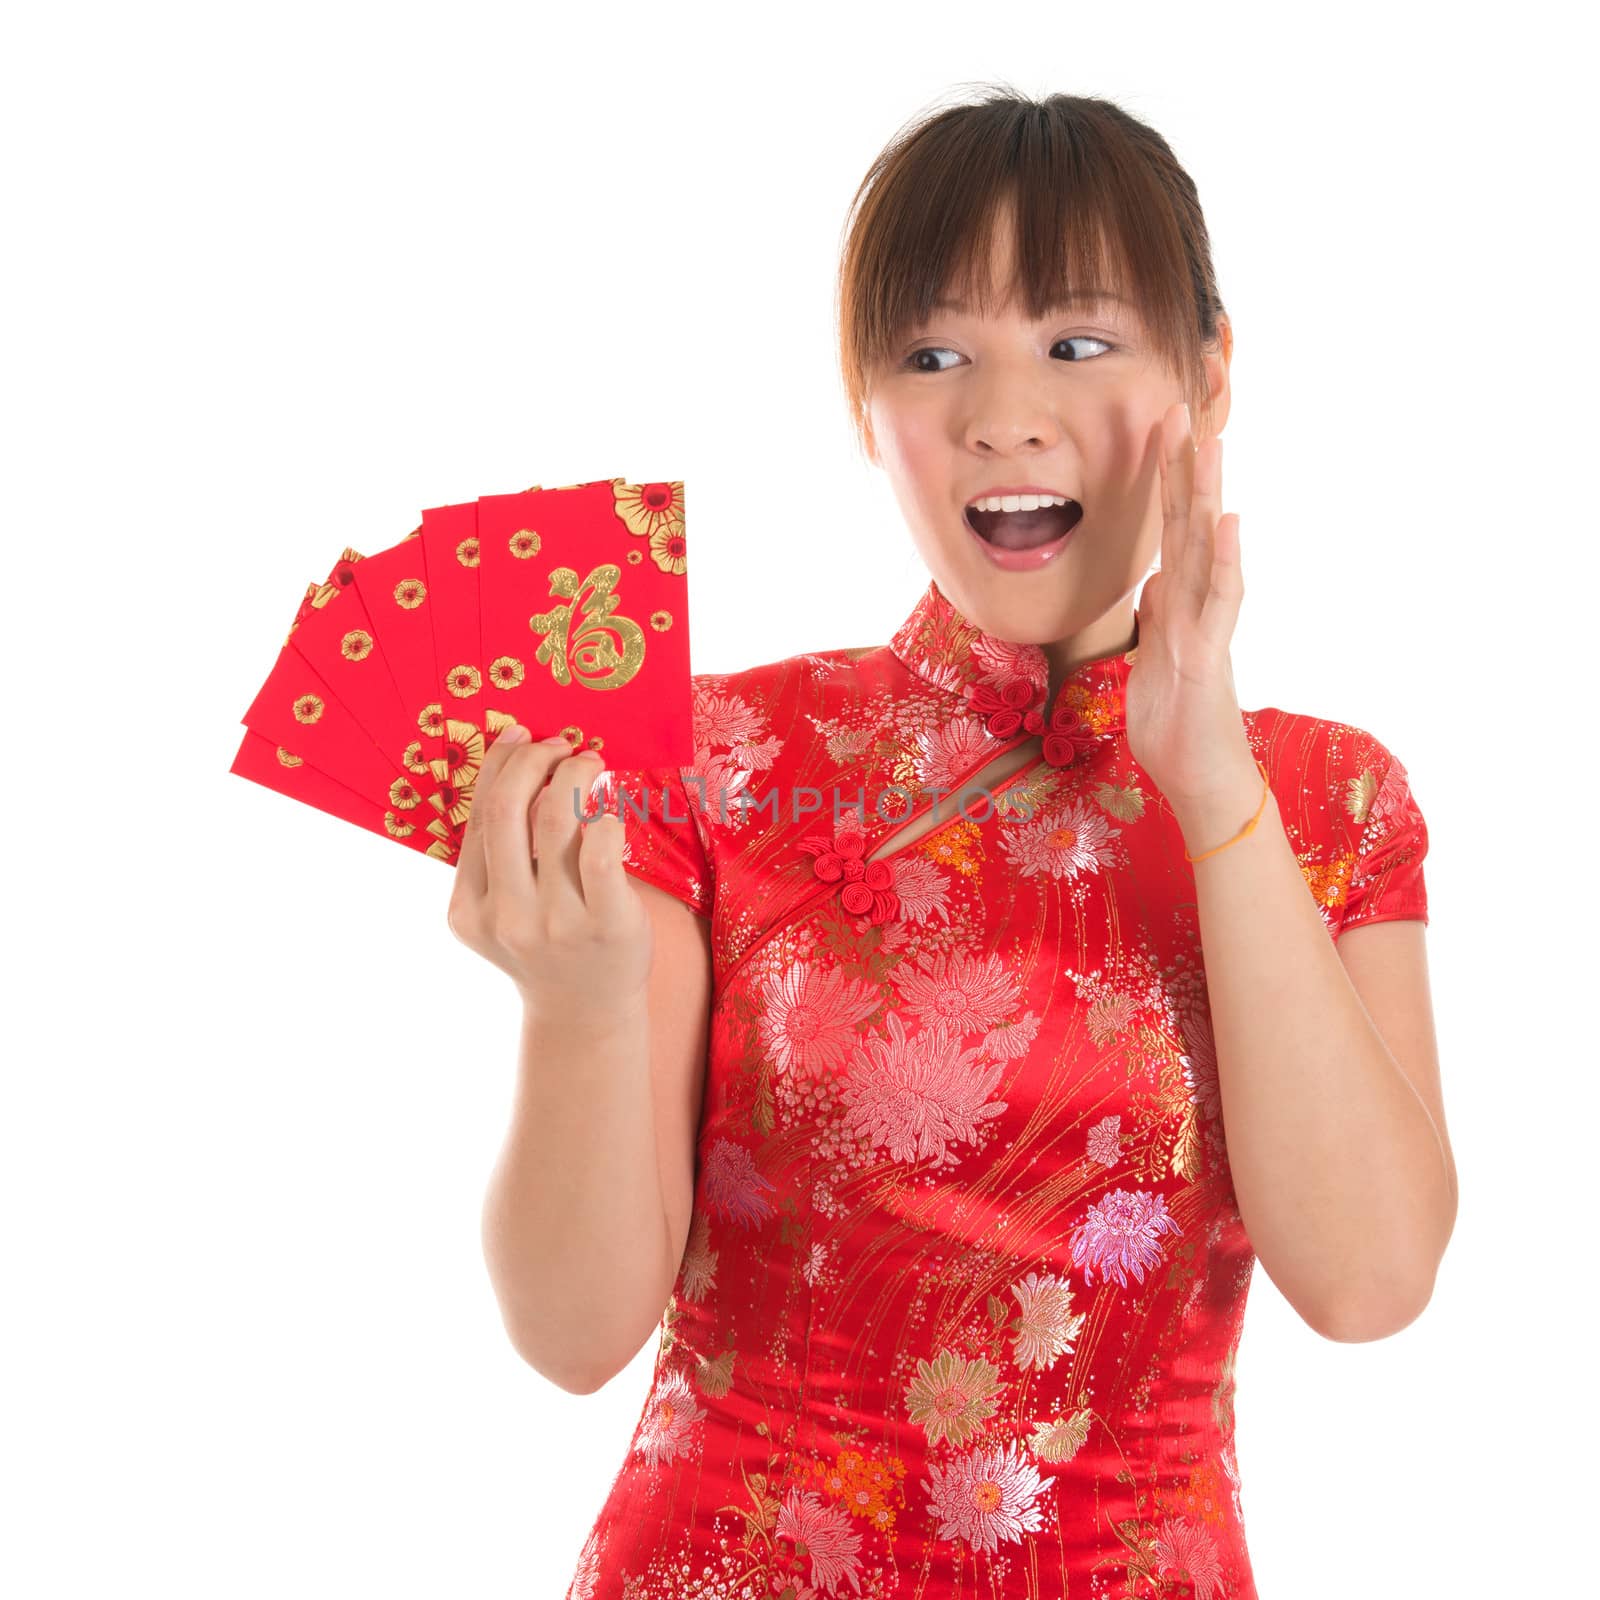 Asian woman with Chinese traditional dress cheongsam or qipao holding ang pow or red packet monetary gift showing surprise face expression. Chinese new year concept, female model isolated on white background.